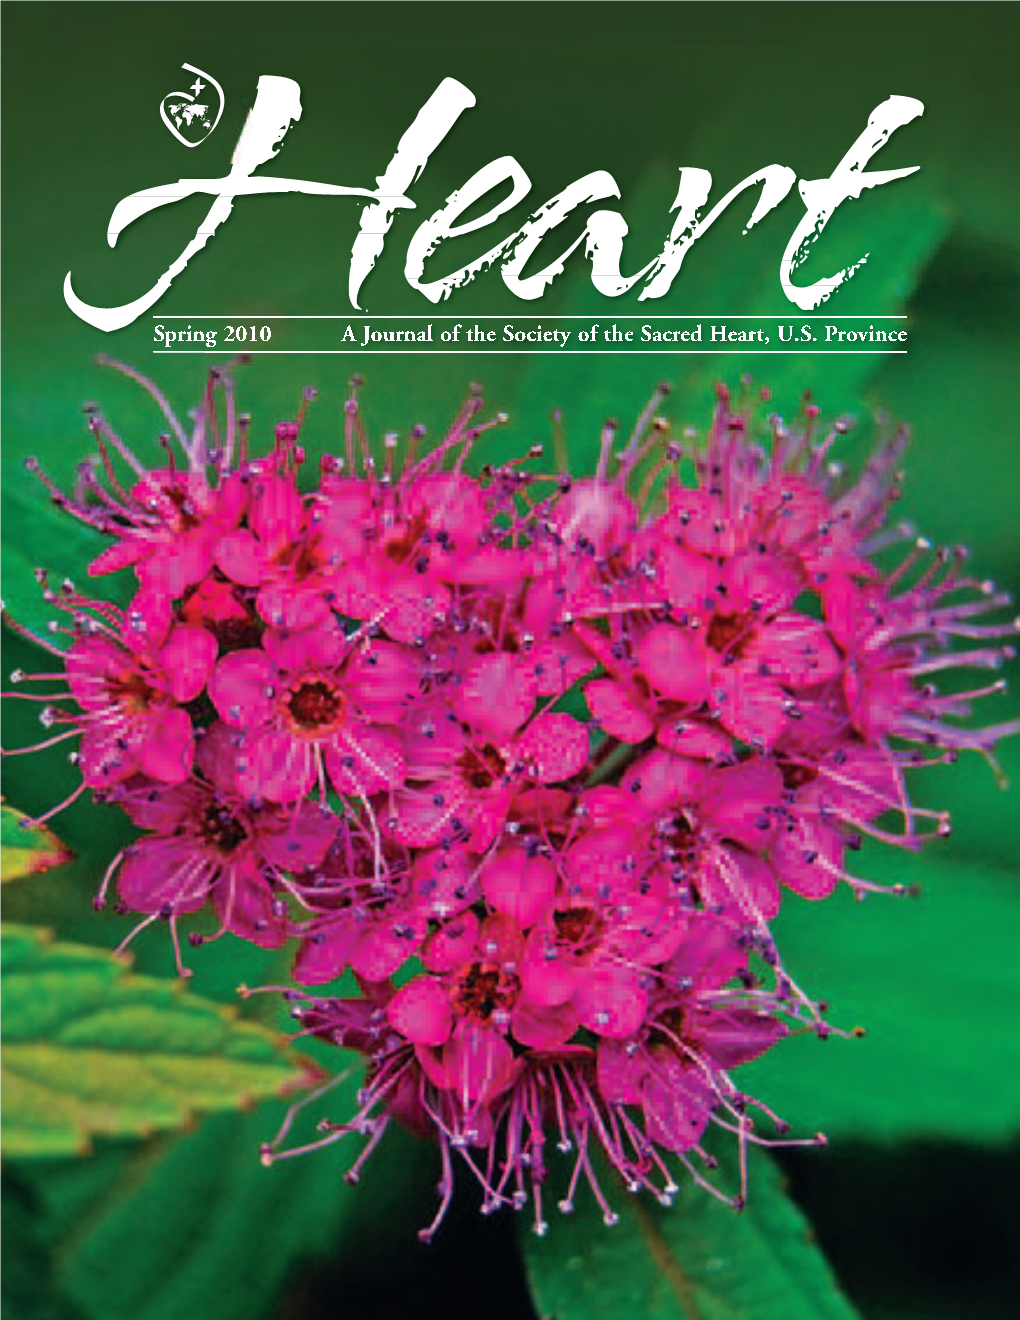 Spring 2010 a Journal of the Society of the Sacred Heart, U.S. Province …To Heart